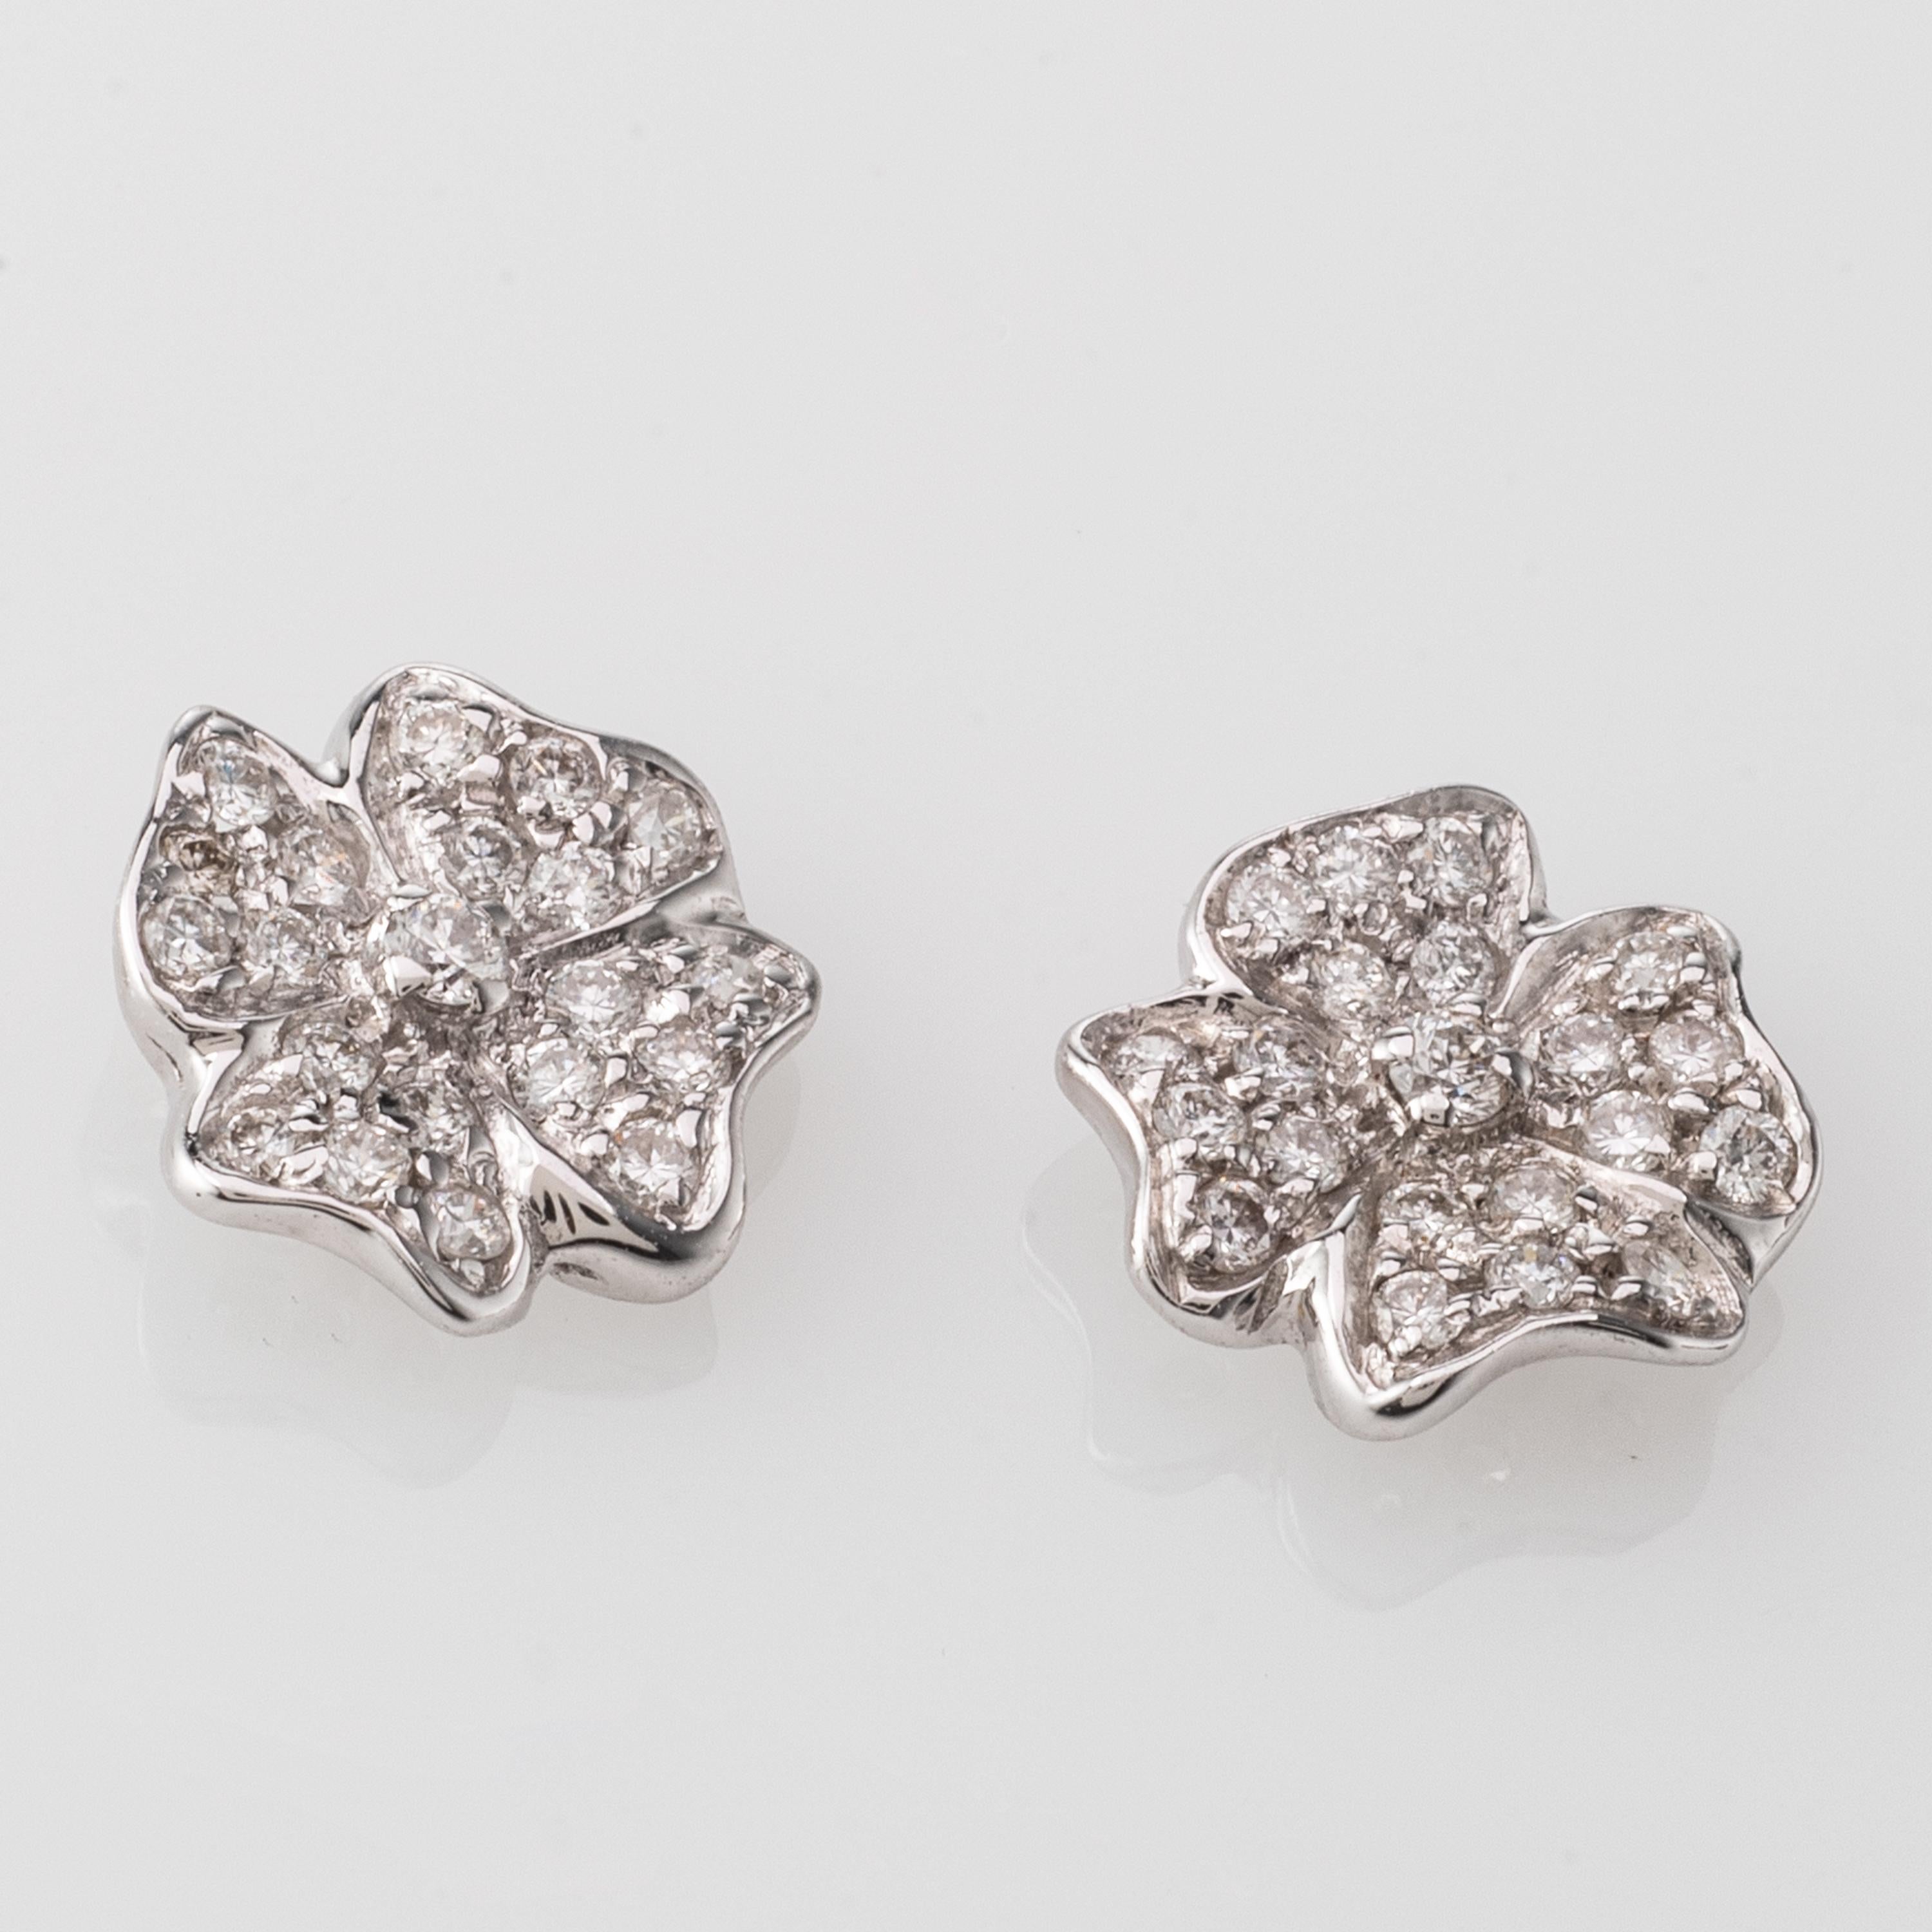 Modern and Elegant Flower Earrings.
0.36 Carat Diamond set in 18 Karat White gold.
Customisation of gold colour, stones is possible. We can custom make this item according to your taste. When customising take place, production time is 2 to 6 weeks.